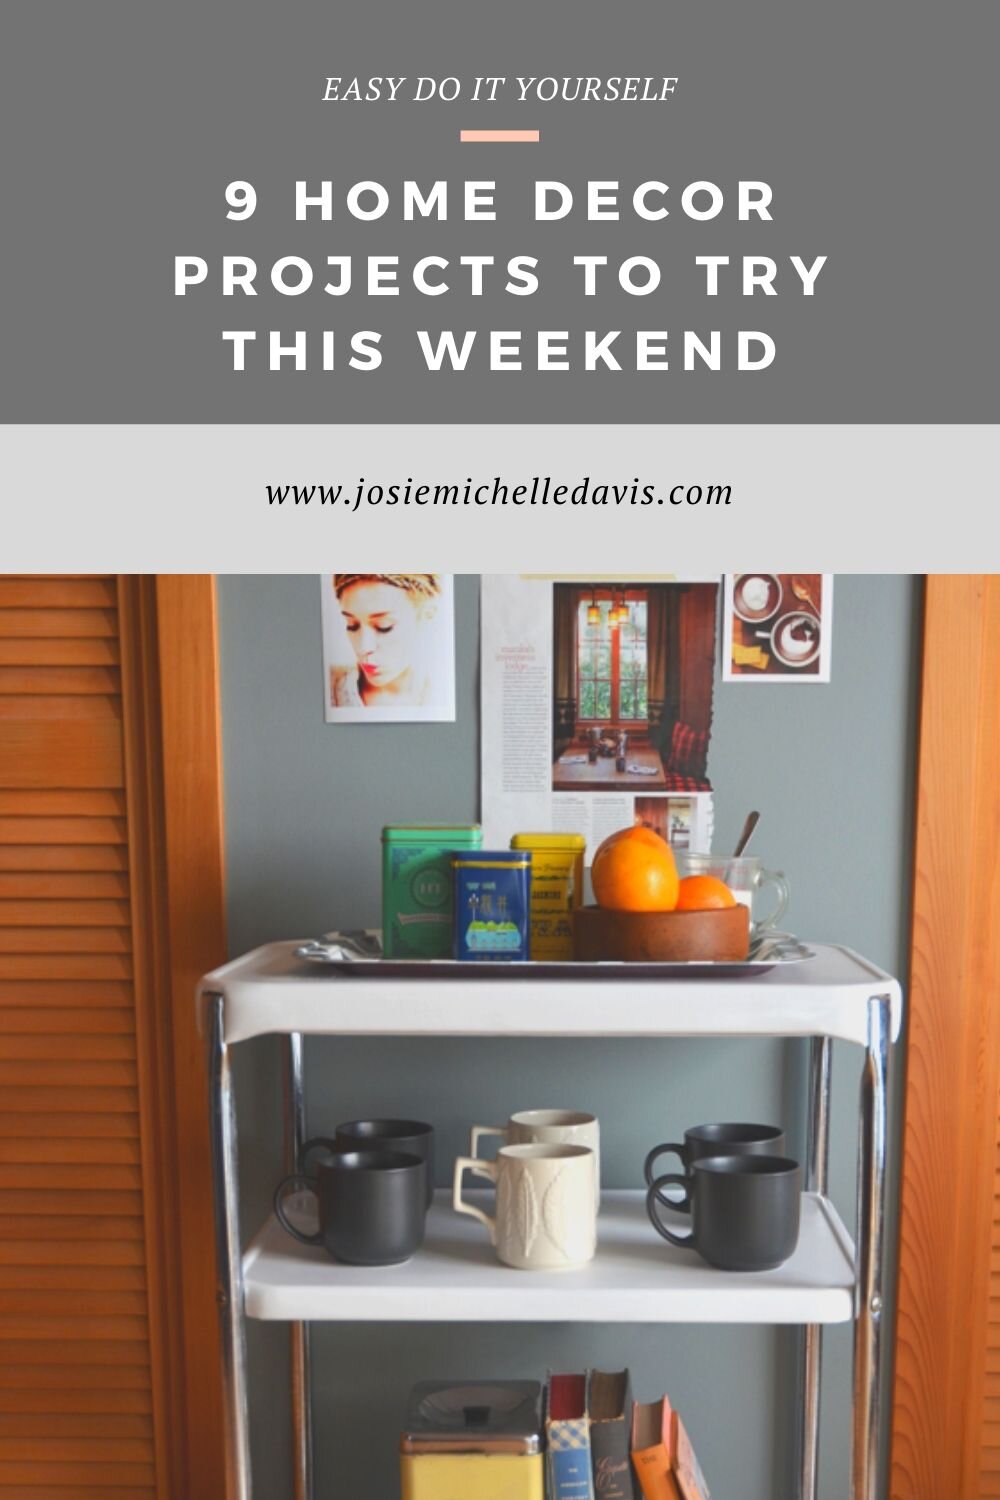 9 Home Decor Projects to Try this weekend - Josie Michelle Davis